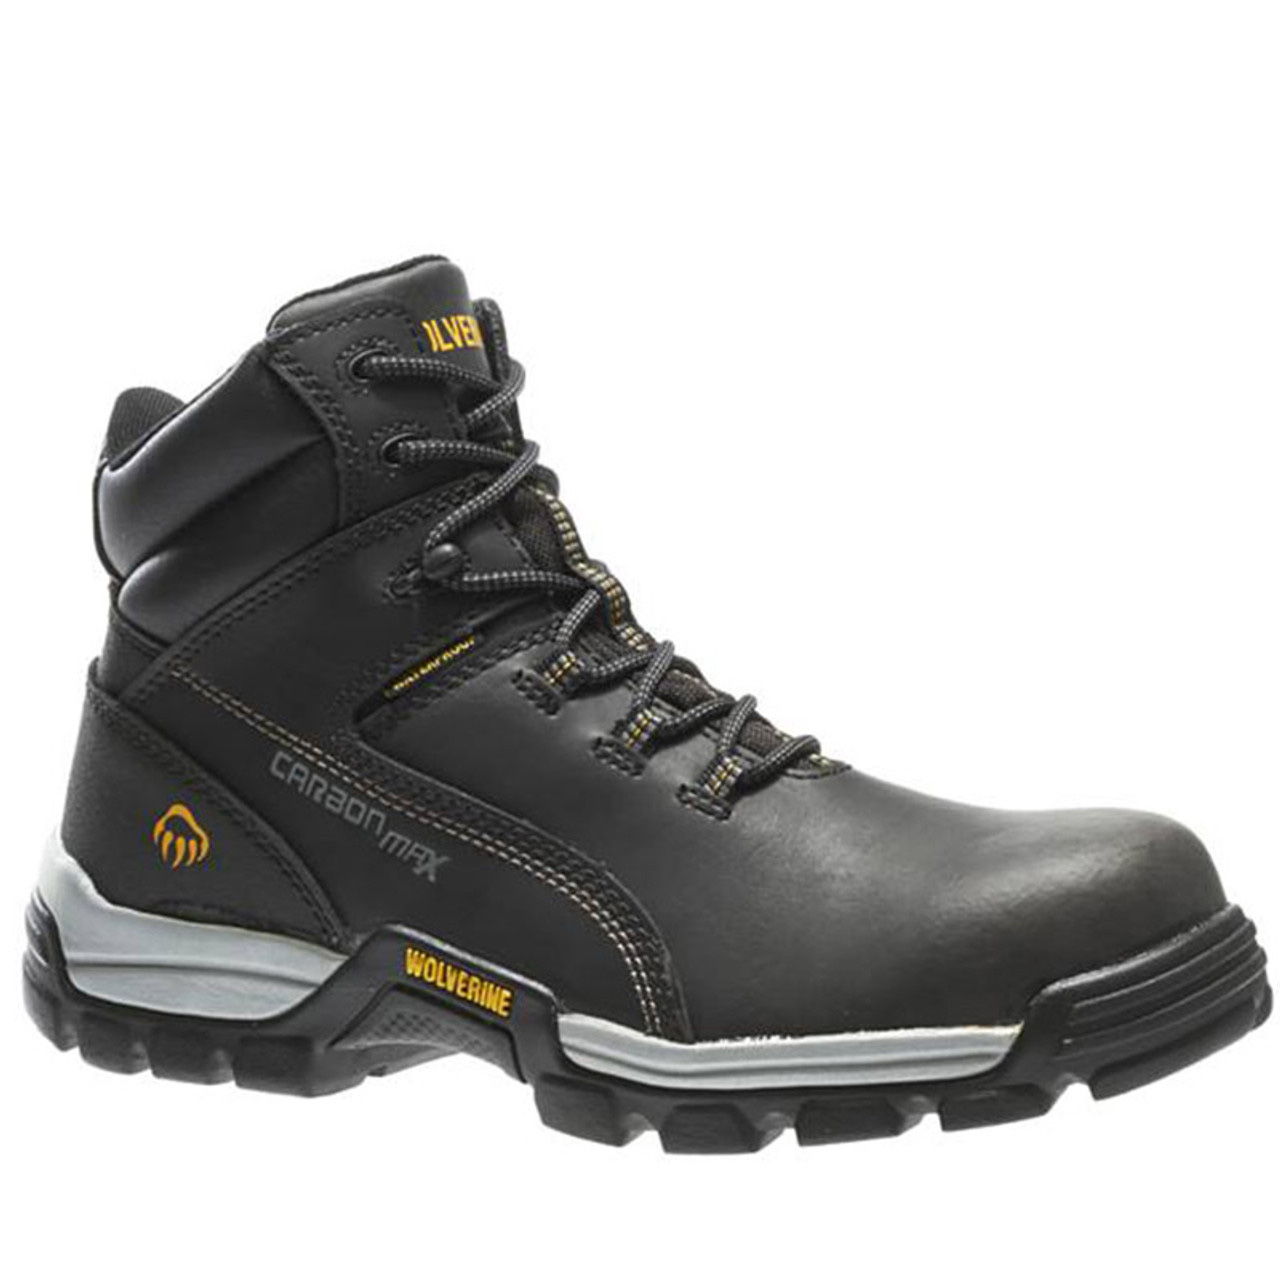 Wolverine W10304 TARMAC CarbonMAX Reflective Boots